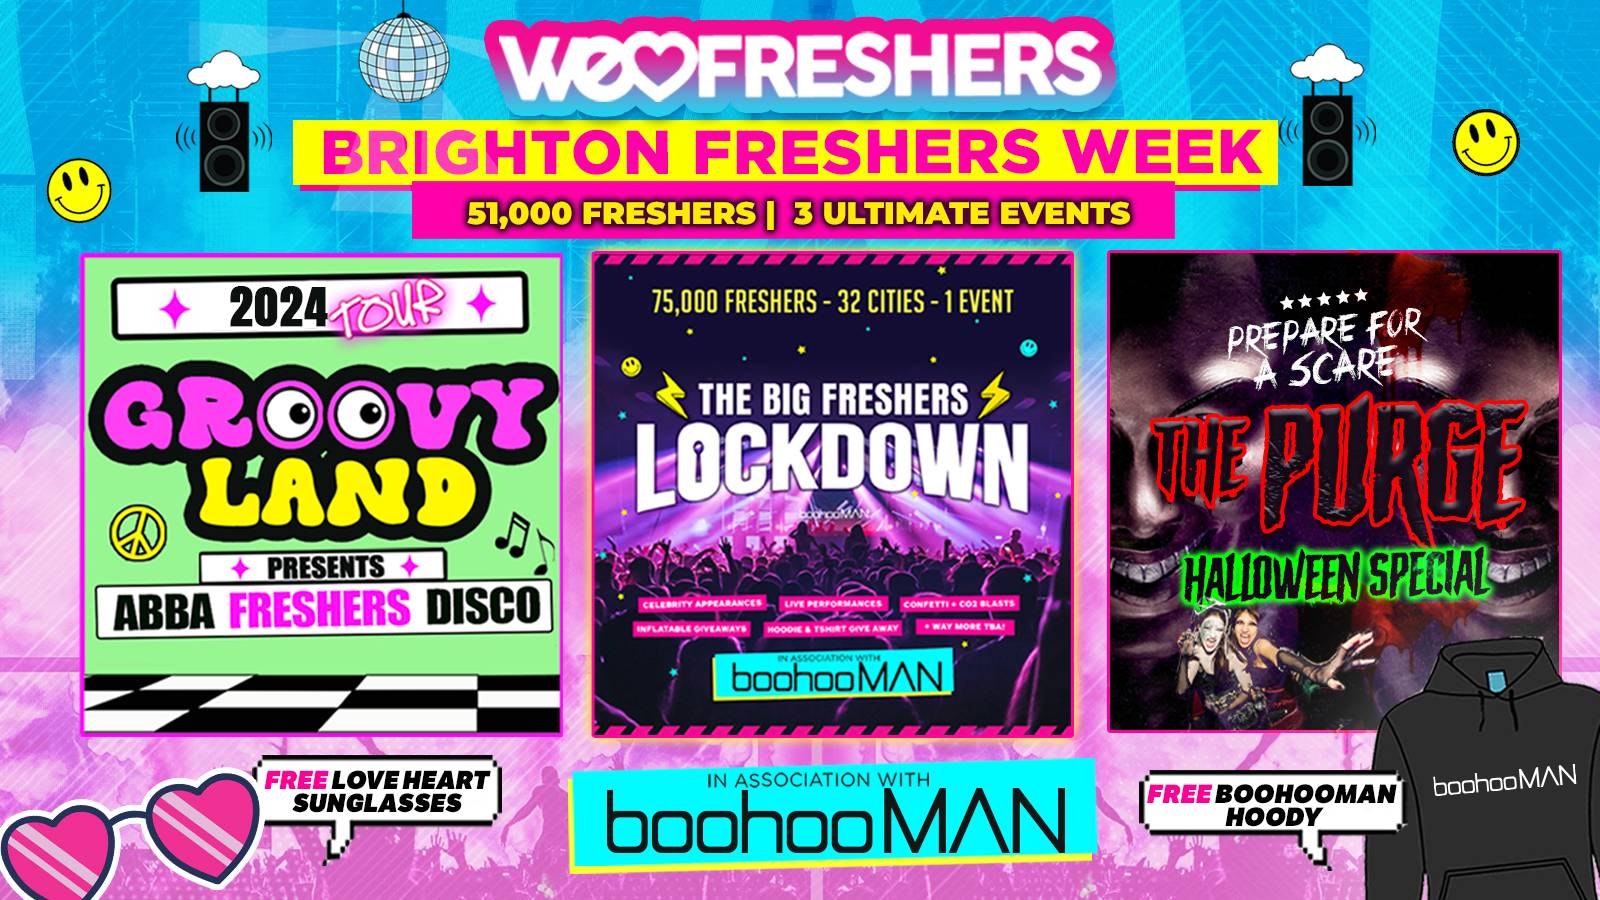 WE LOVE BRIGHTON FRESHERS 2024 in association with boohooMAN – 3 EVENTS❗